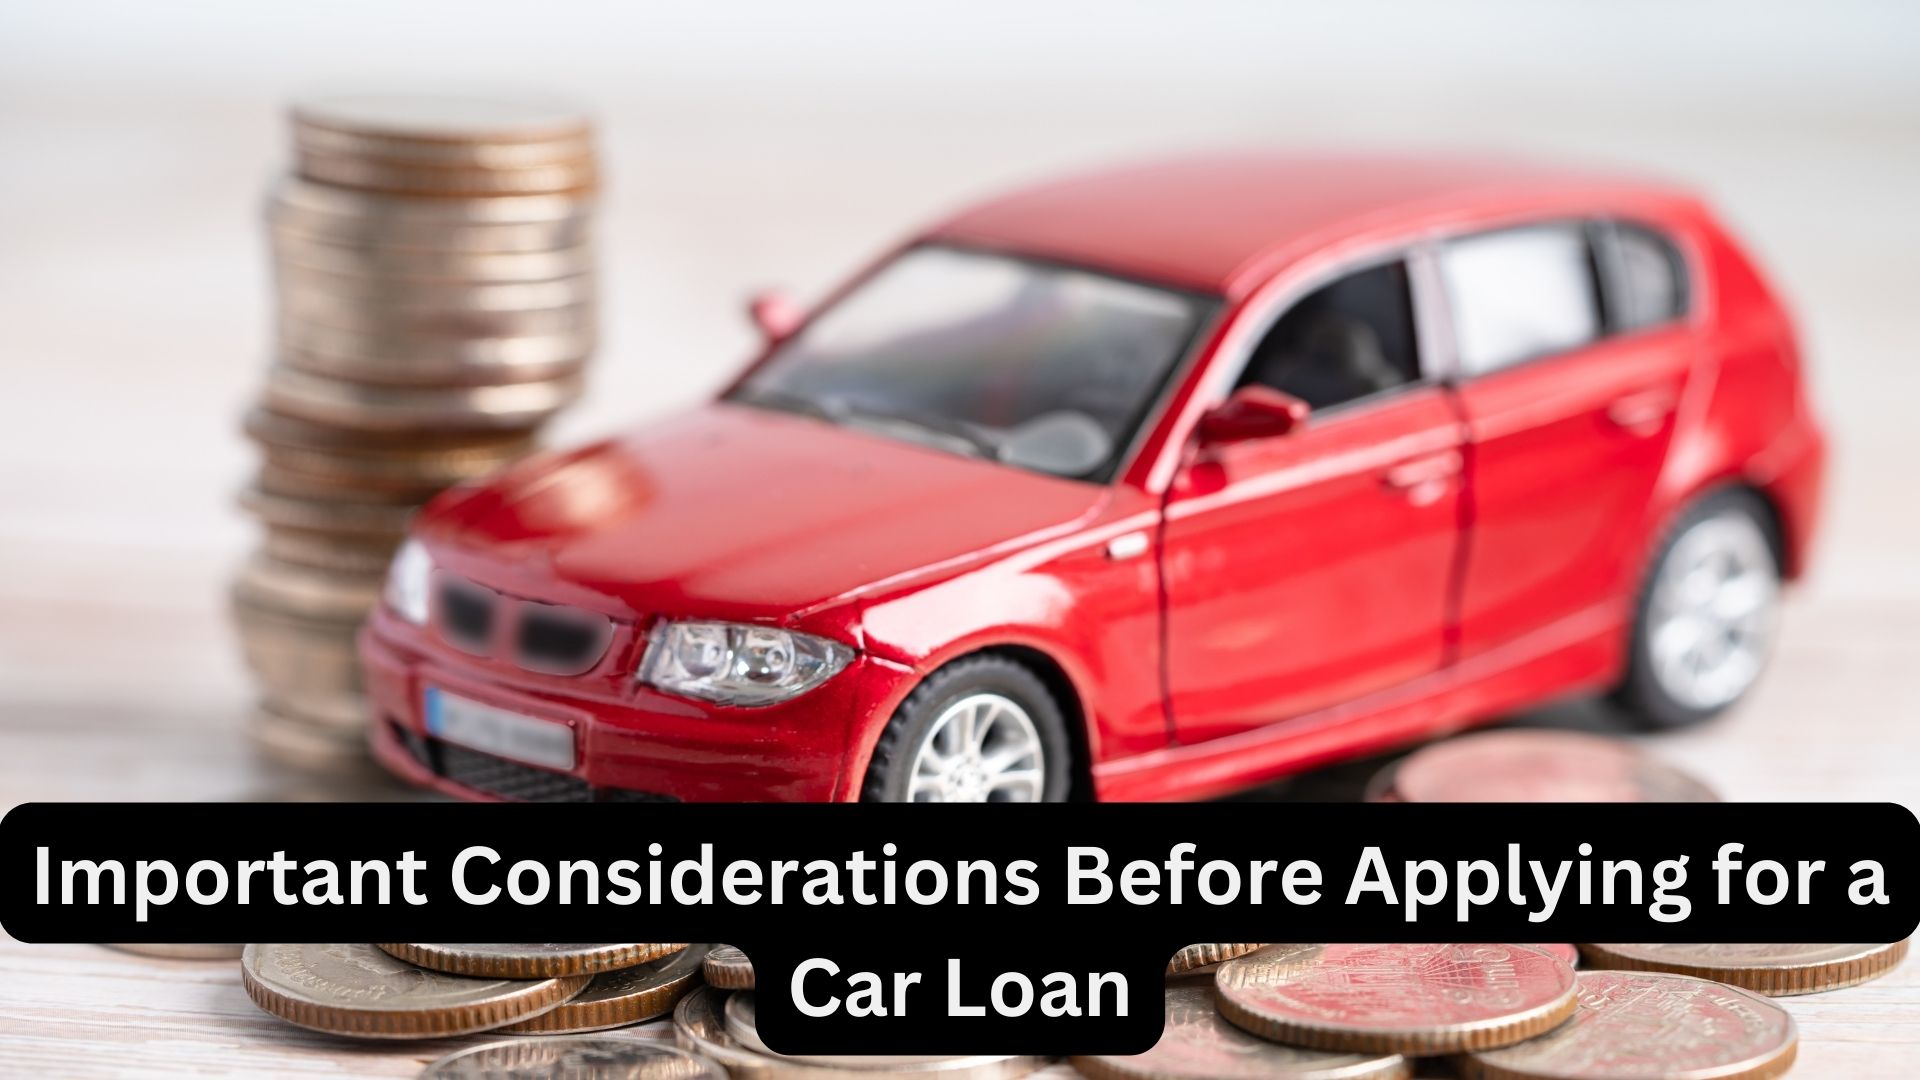 Important Considerations Before Applying for a Car Loan